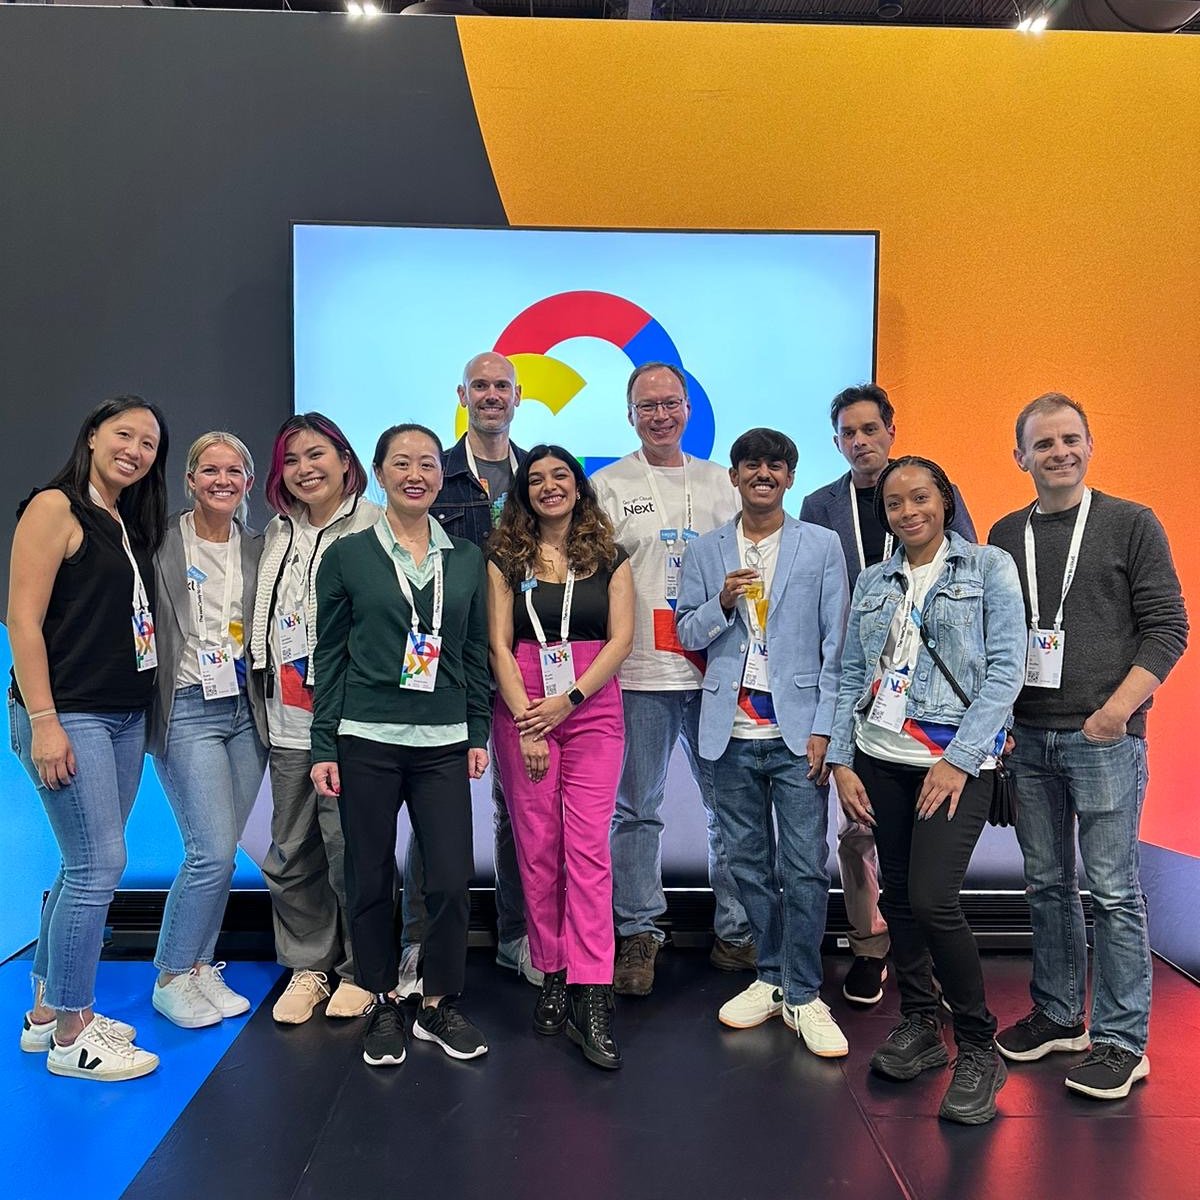 That’s a wrap! 👏 It was wonderful seeing so many Kaggle community members in person at #GoogleCloudNext this year. This may have been the LARGEST in-person meetup of Kagglers to date 🤯